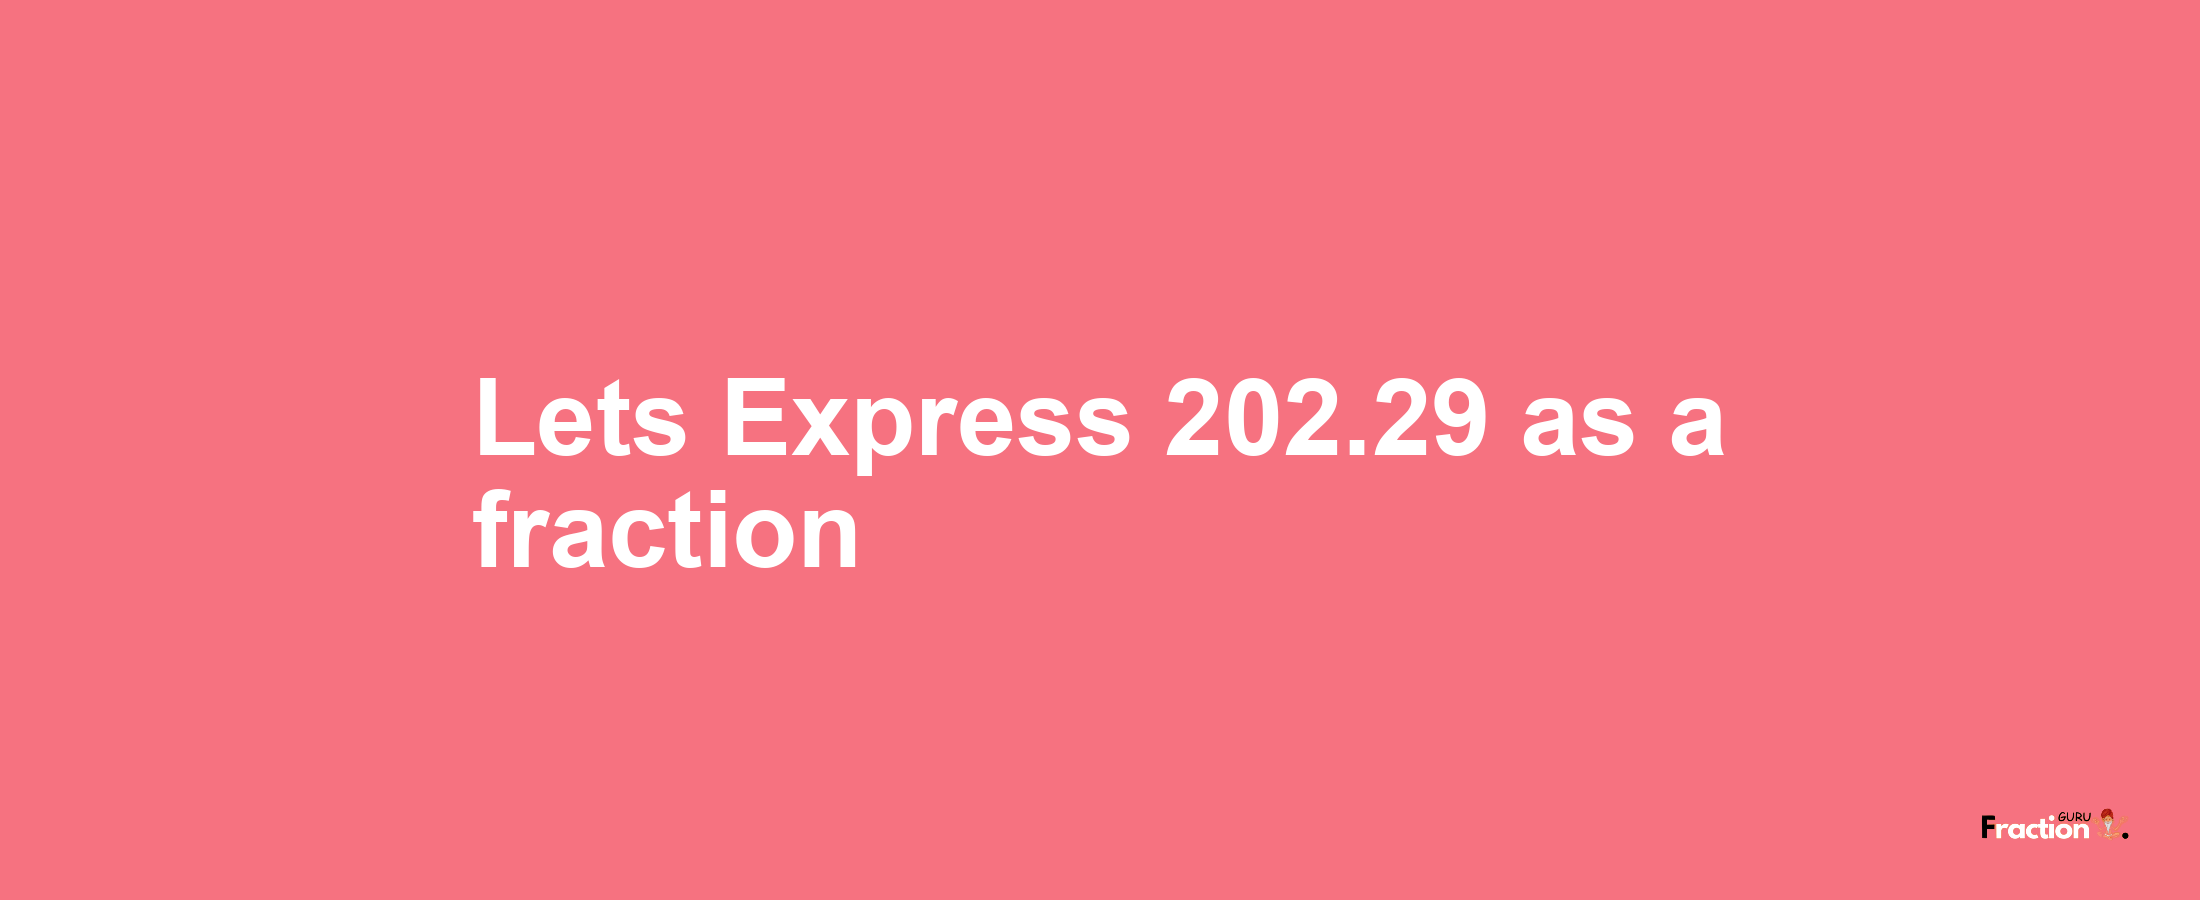 Lets Express 202.29 as afraction